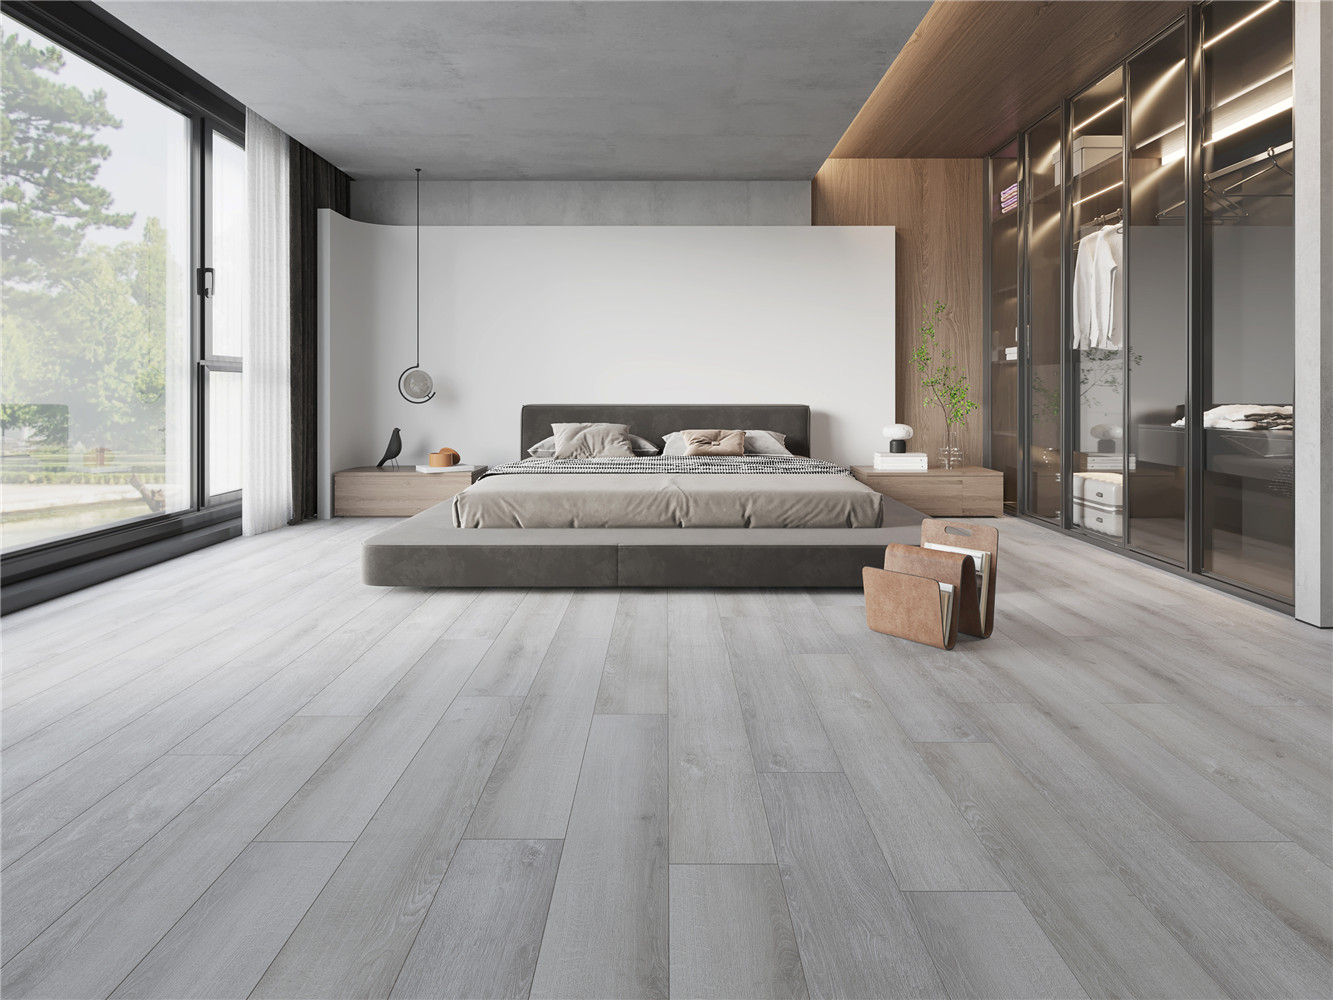 Which is better WPC or SPC Flooring？